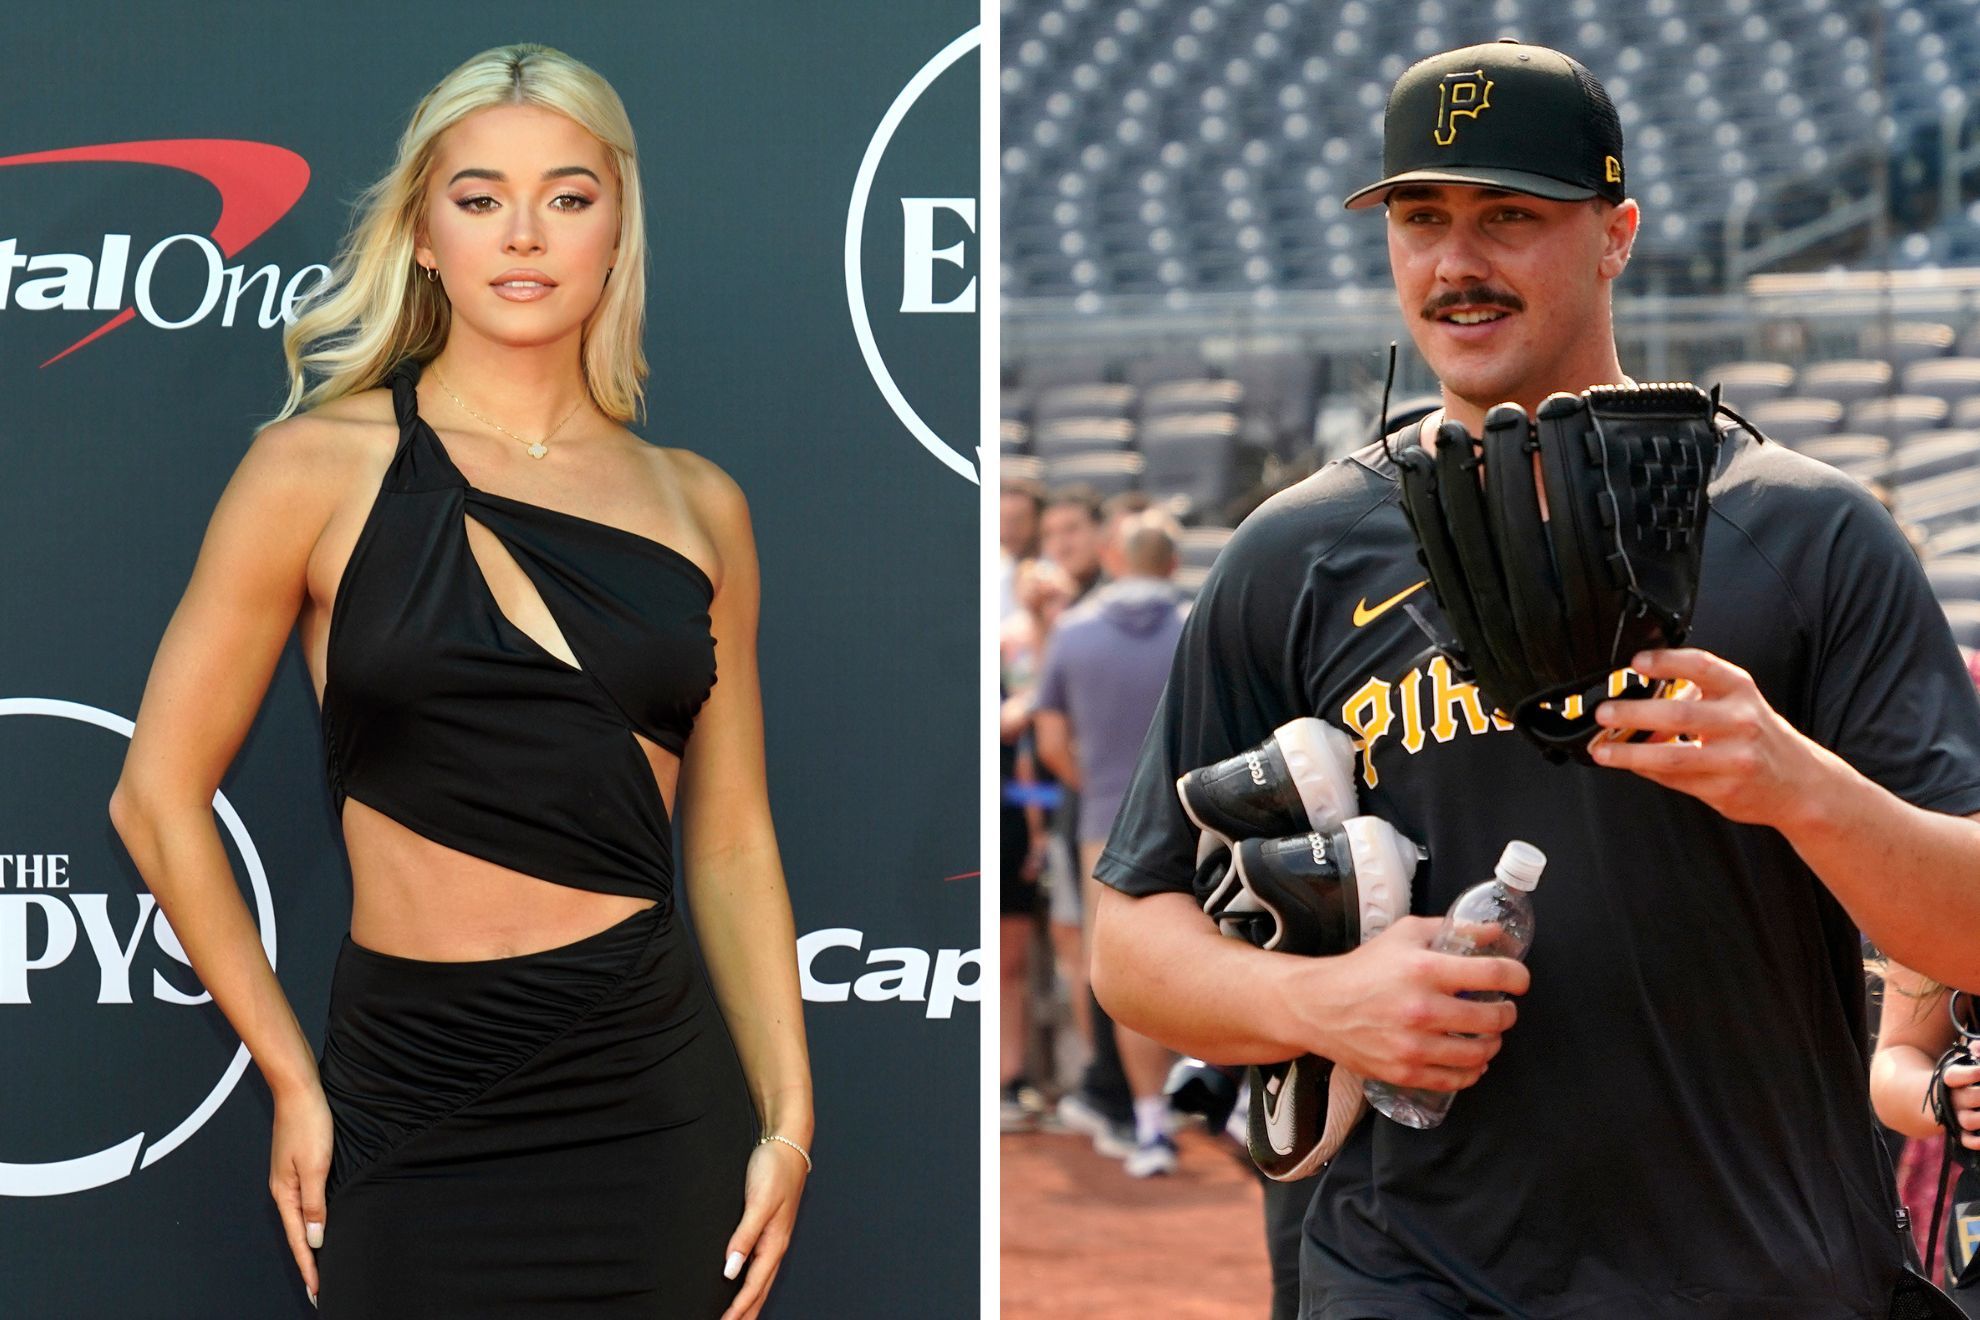 Olivia Dunne all but confirms romance with No. 1 pick in 2023 MLB Draft Paul Skenes